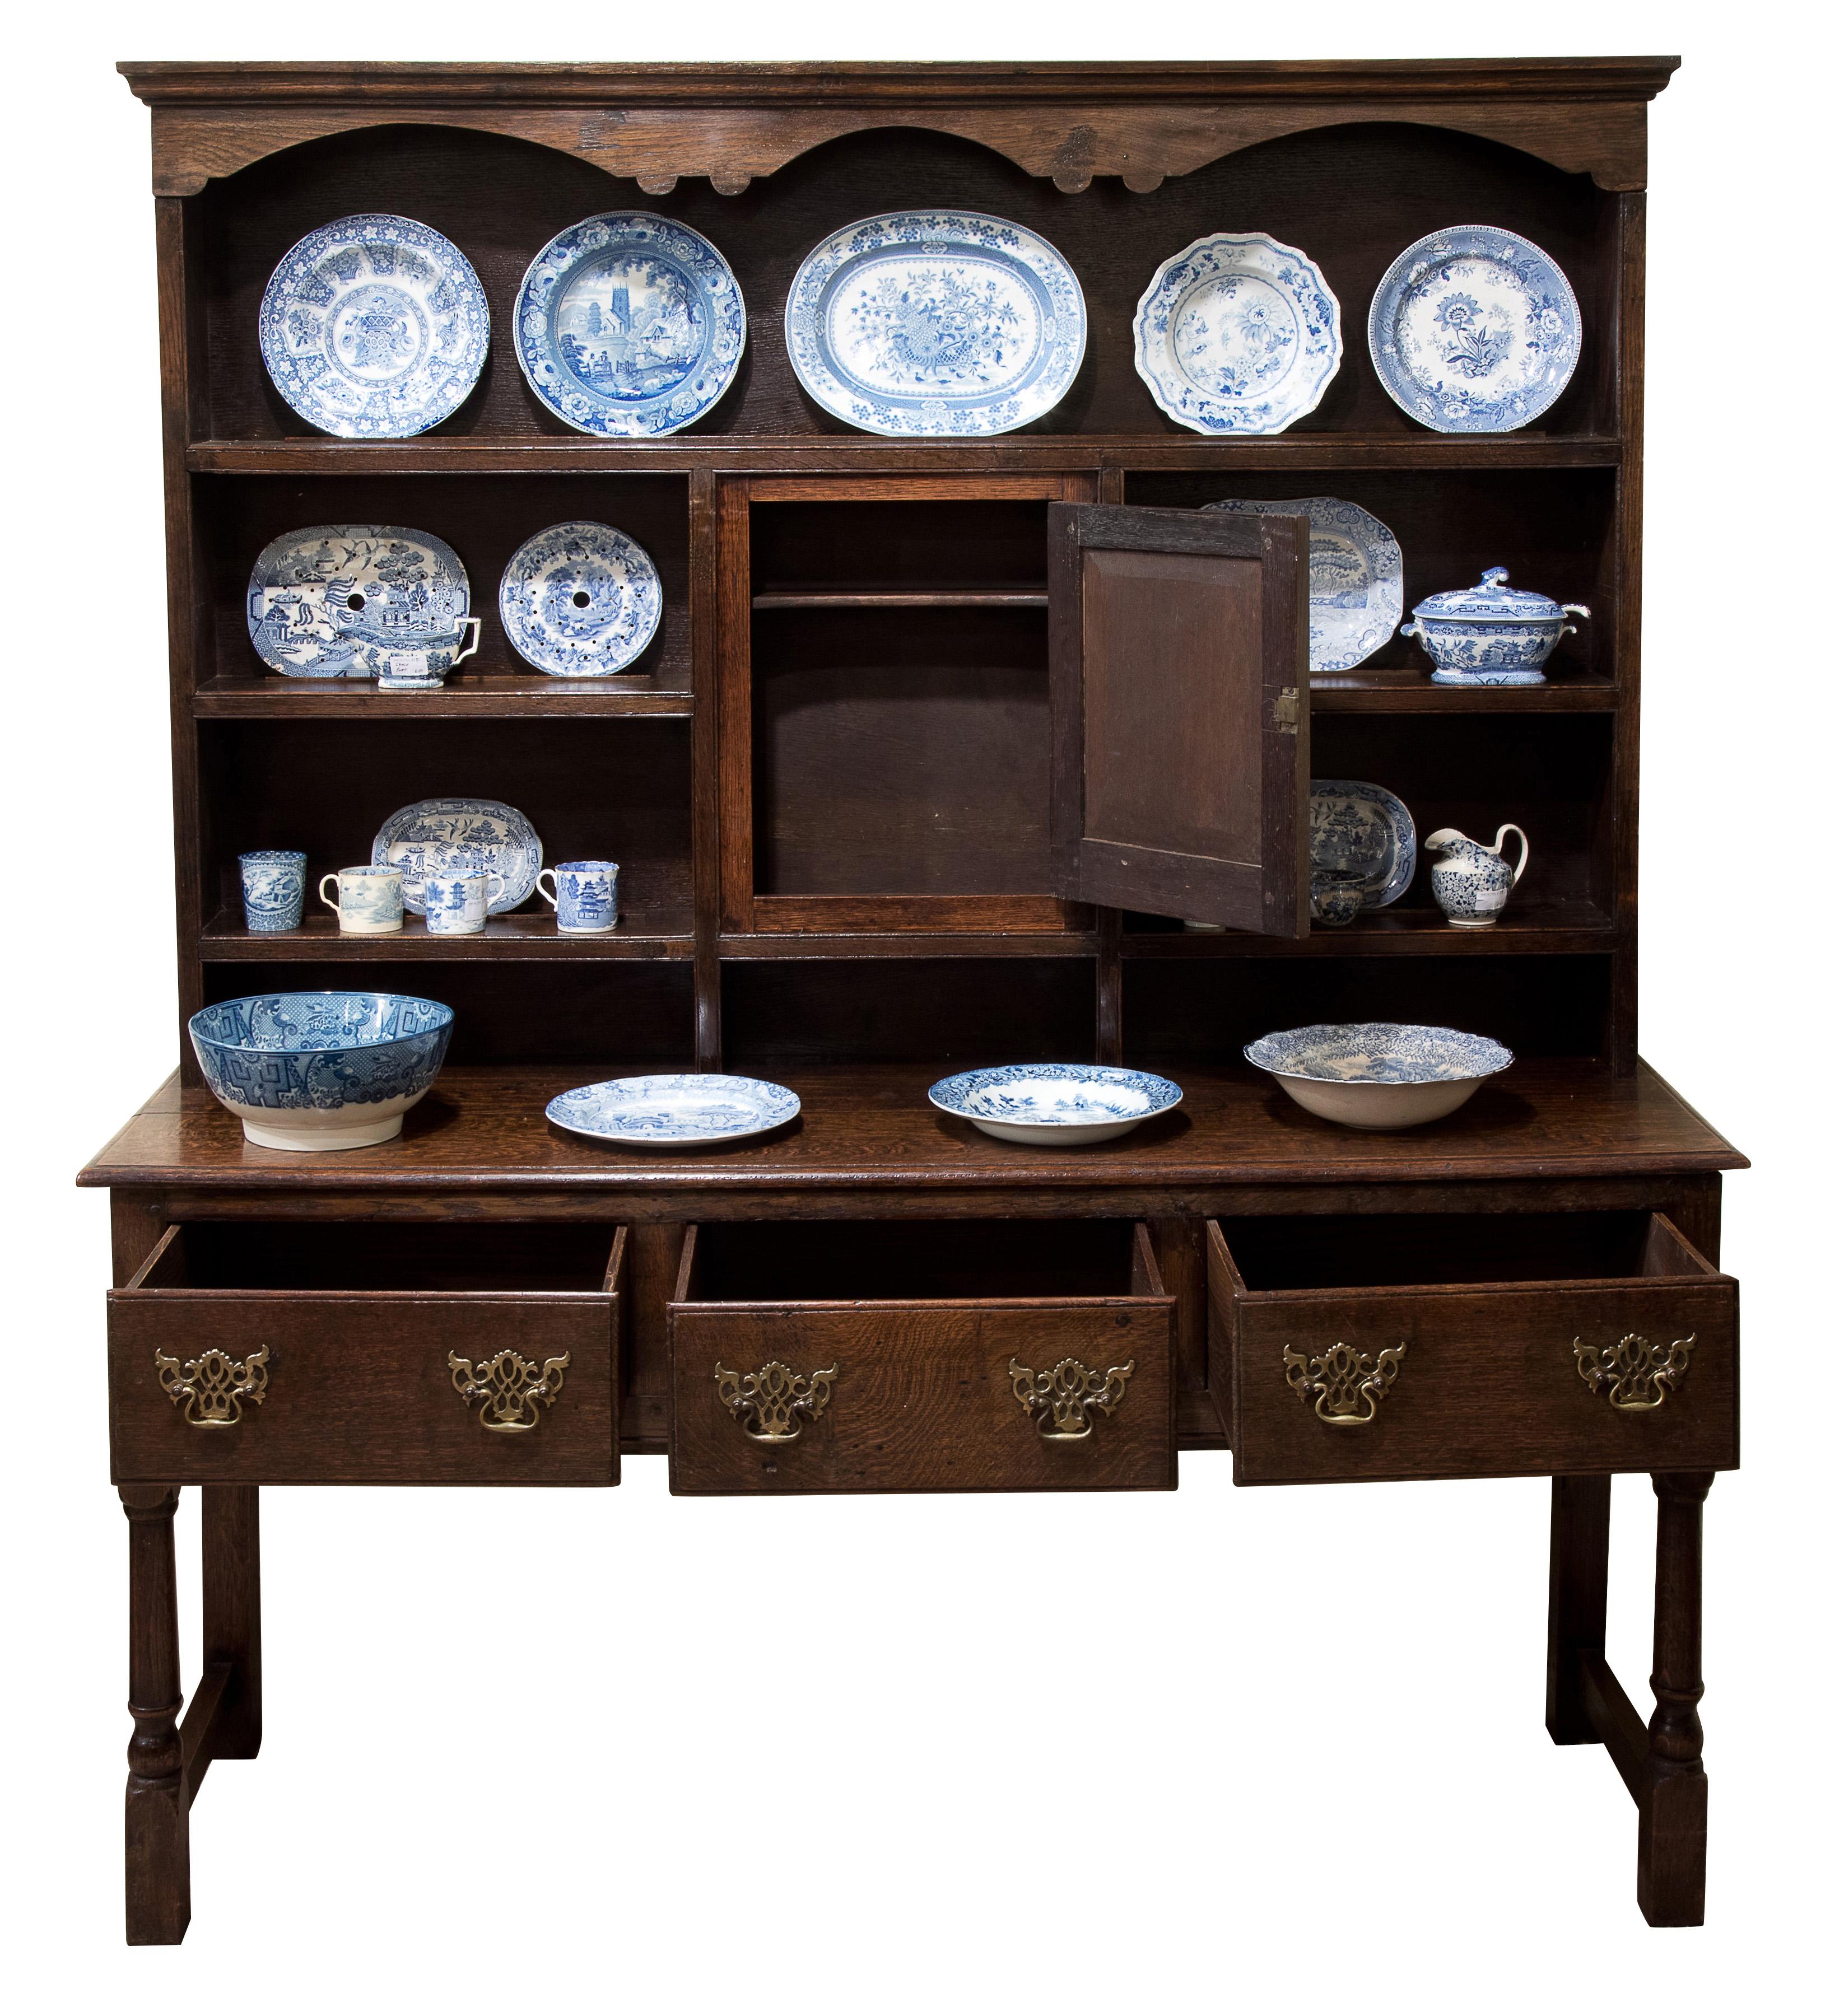 An English, solid oak dresser. The base fitted with three drawers. The plate rack incorporating a cupboard.

circa 1910.